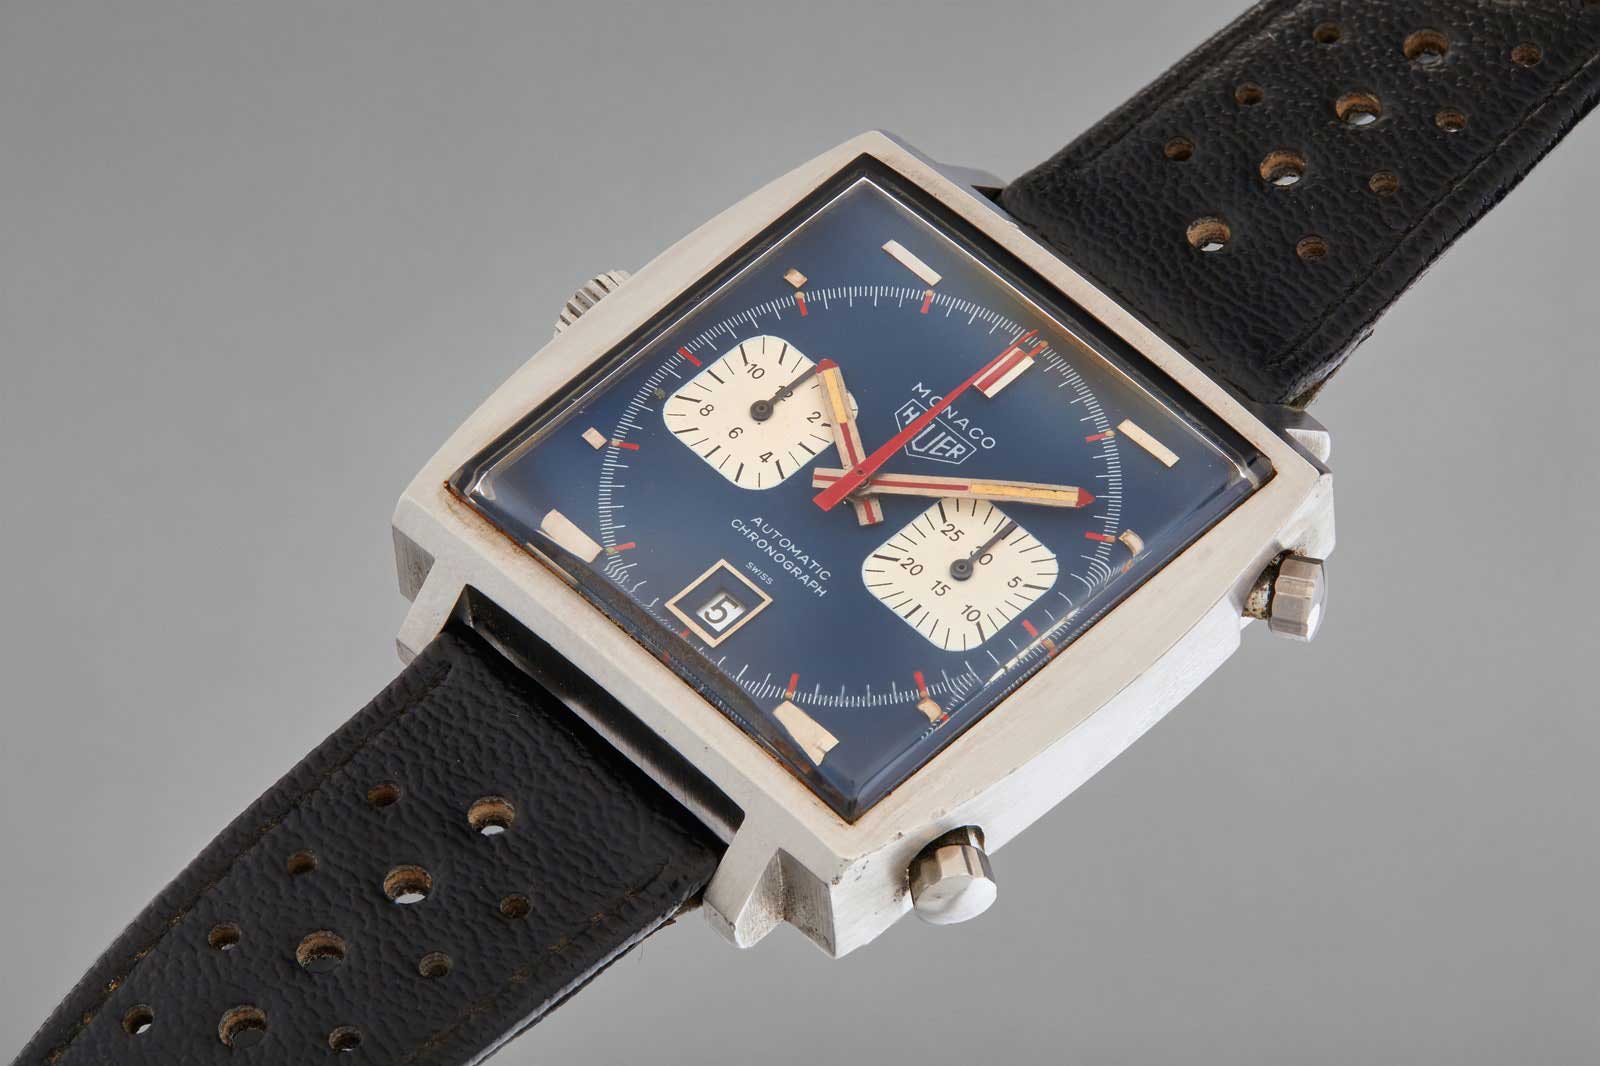 One of six Heuer Monaco watches used during the filming of Steve McQueen's 1970 film, Le mans to be auctioned by Phillips at 2020 New York sale, on 12 December (Image: phillipswatches)